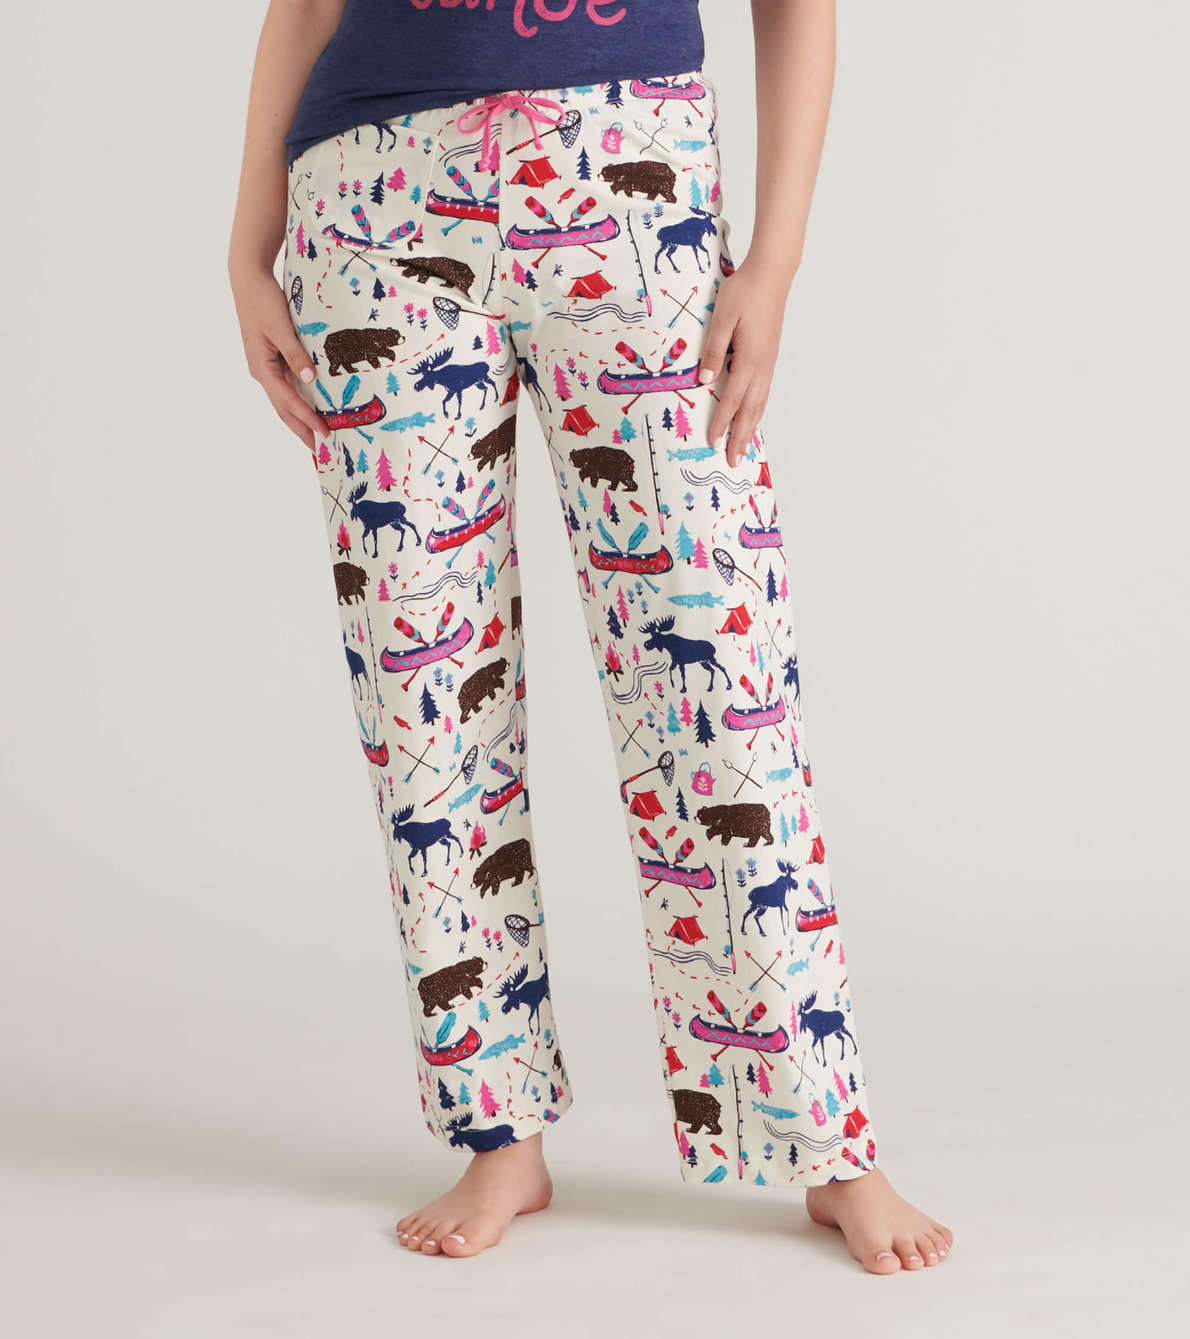 View larger image of Pretty Sketch Country Women's Jersey Pajama Pants